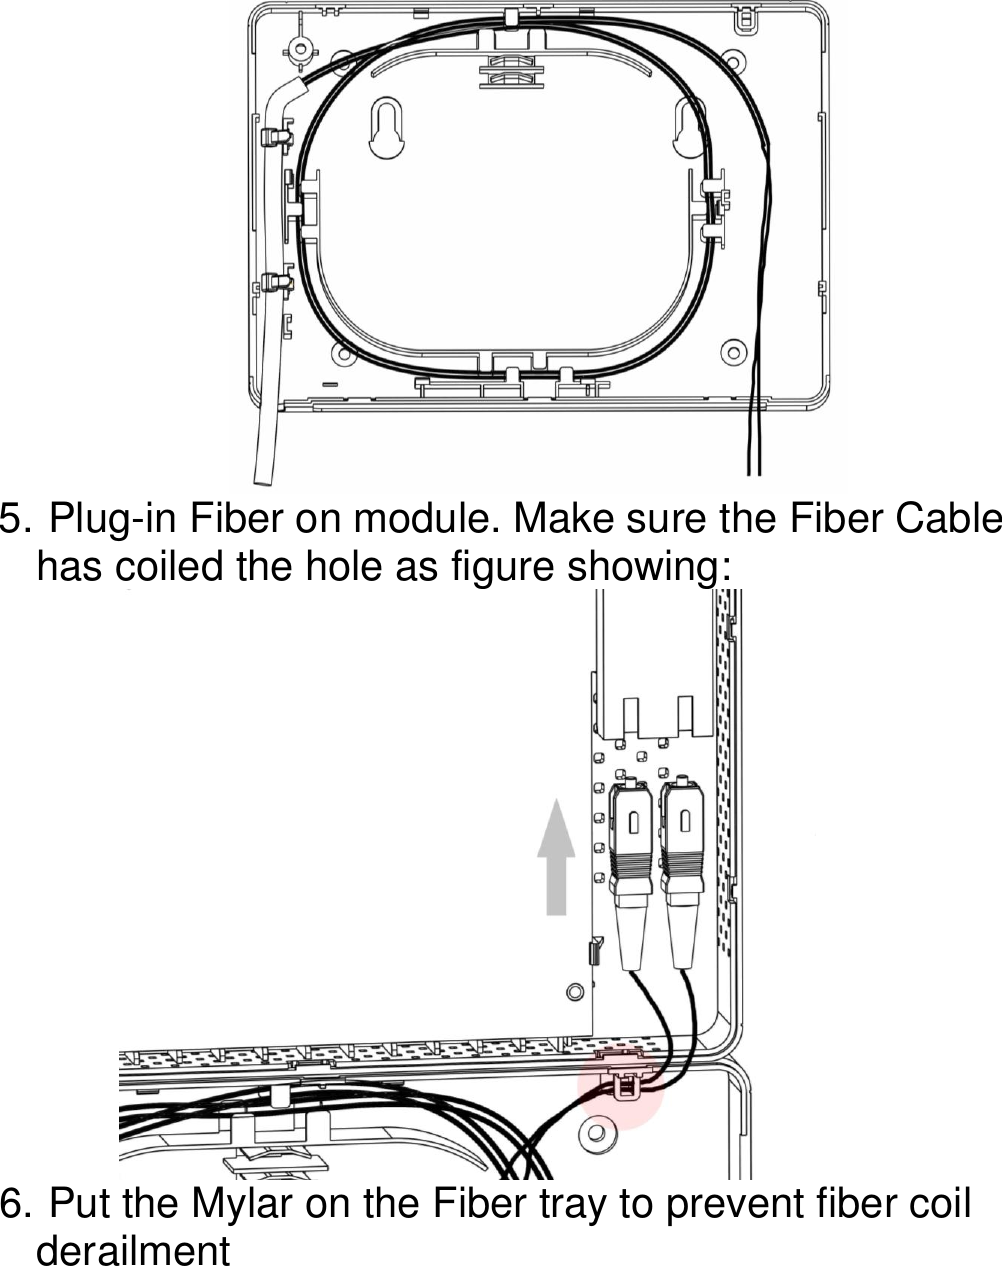    5.  Plug-in Fiber on module. Make sure the Fiber Cable has coiled the hole as figure showing:  6.  Put the Mylar on the Fiber tray to prevent fiber coil derailment 